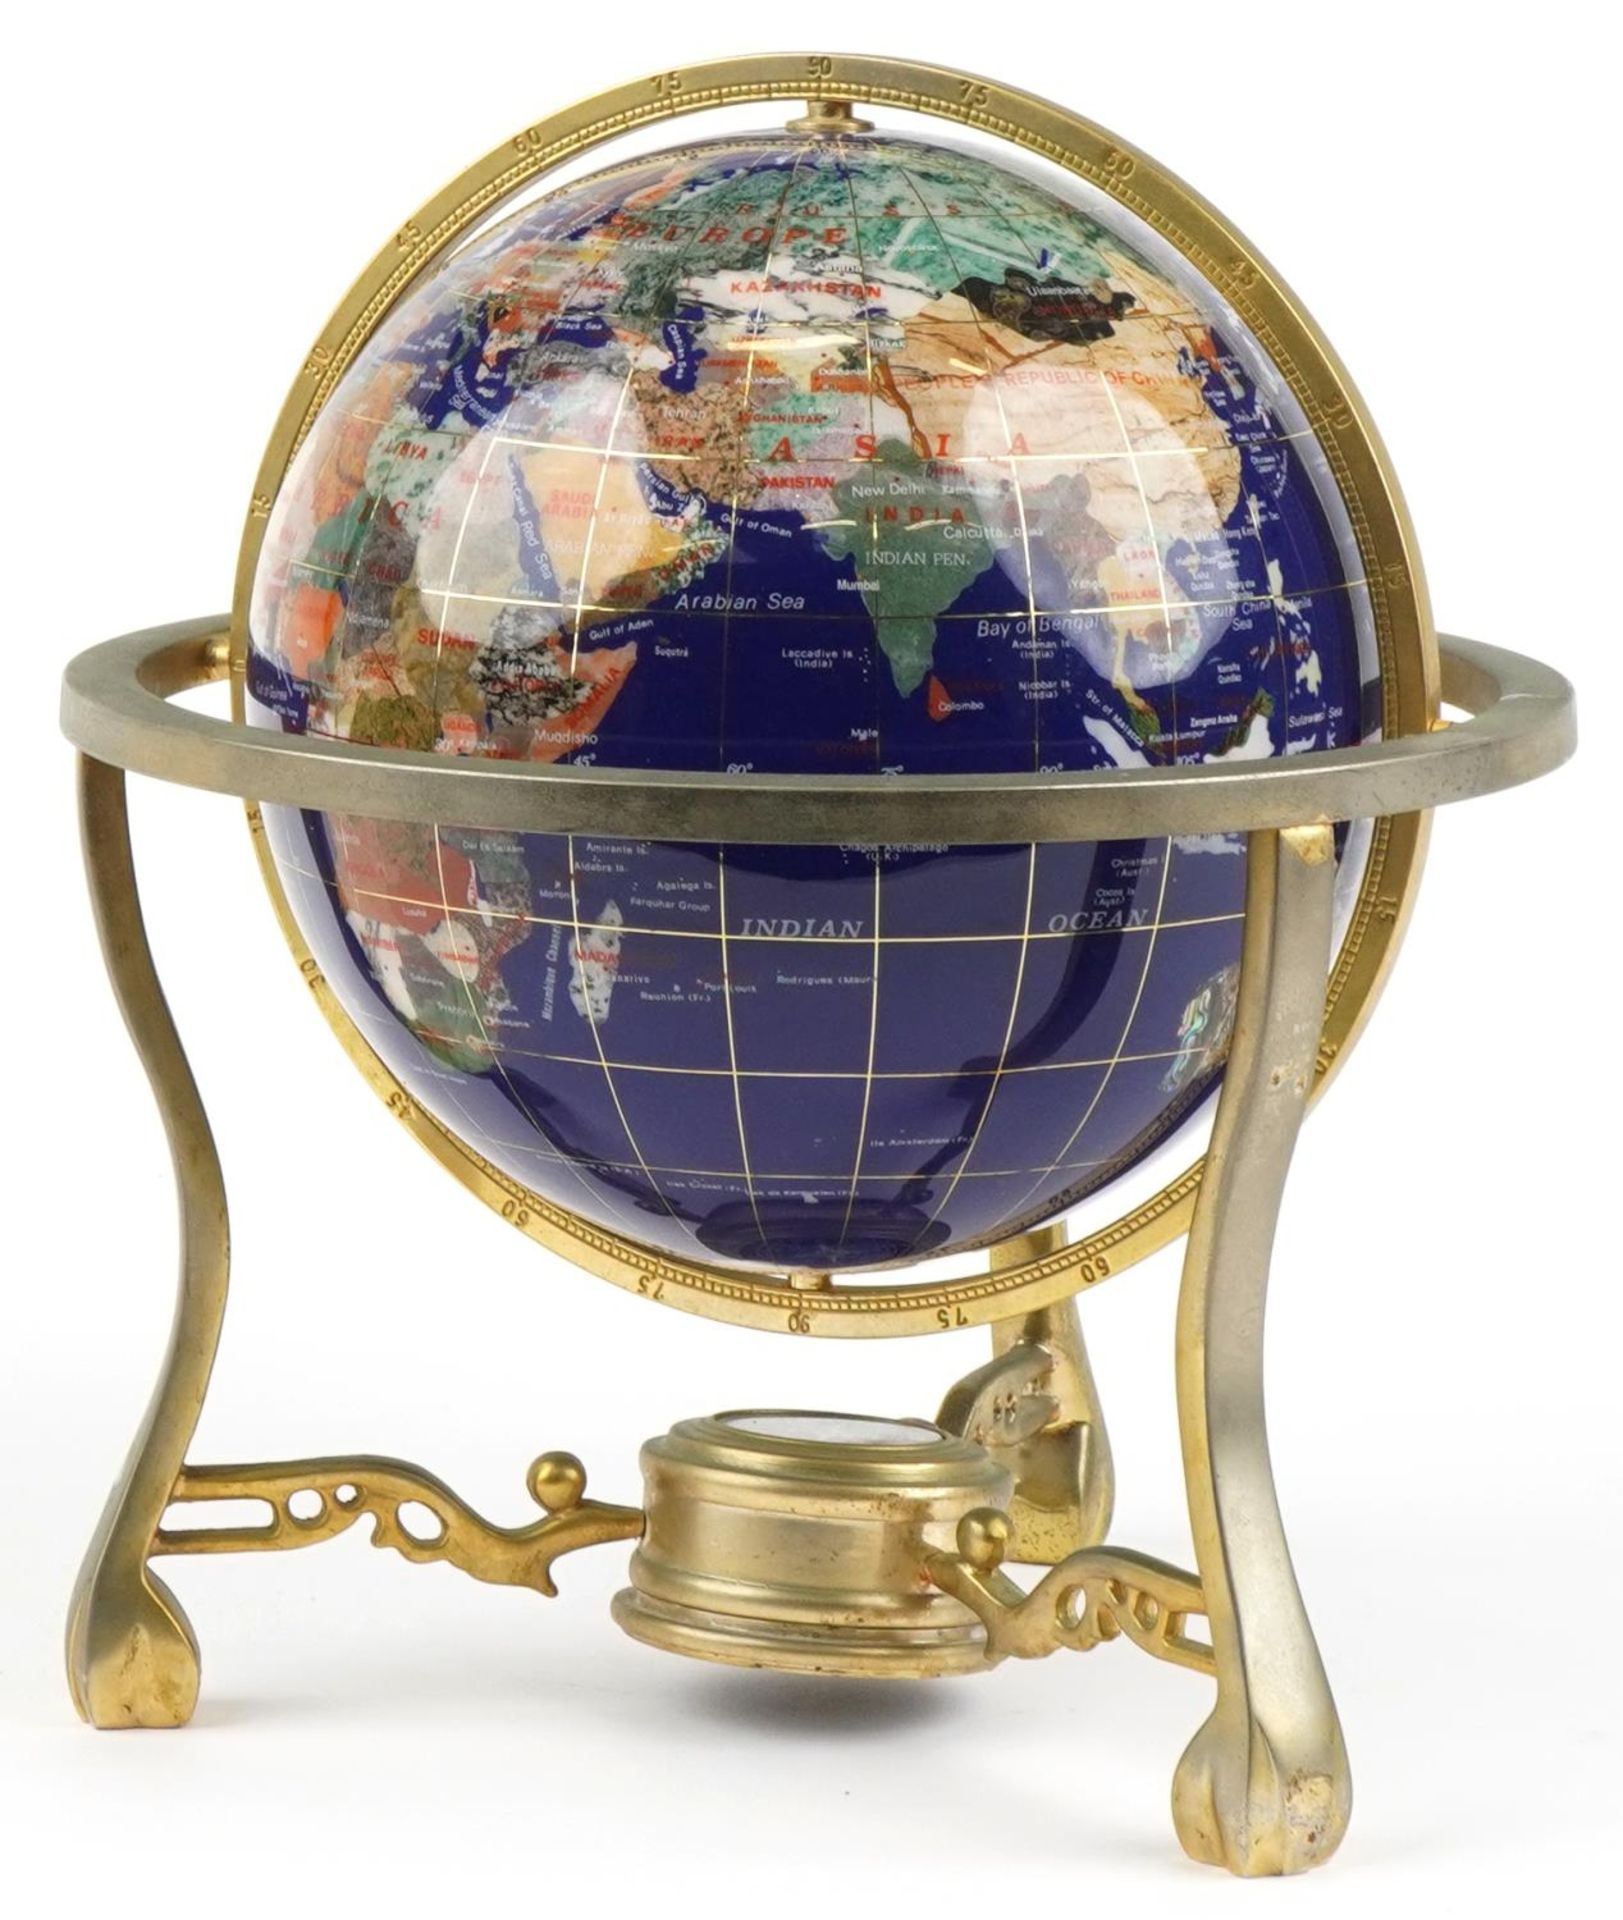 Specimen table globe with bronzed mounts and compass under tier, 33cm high : For further information